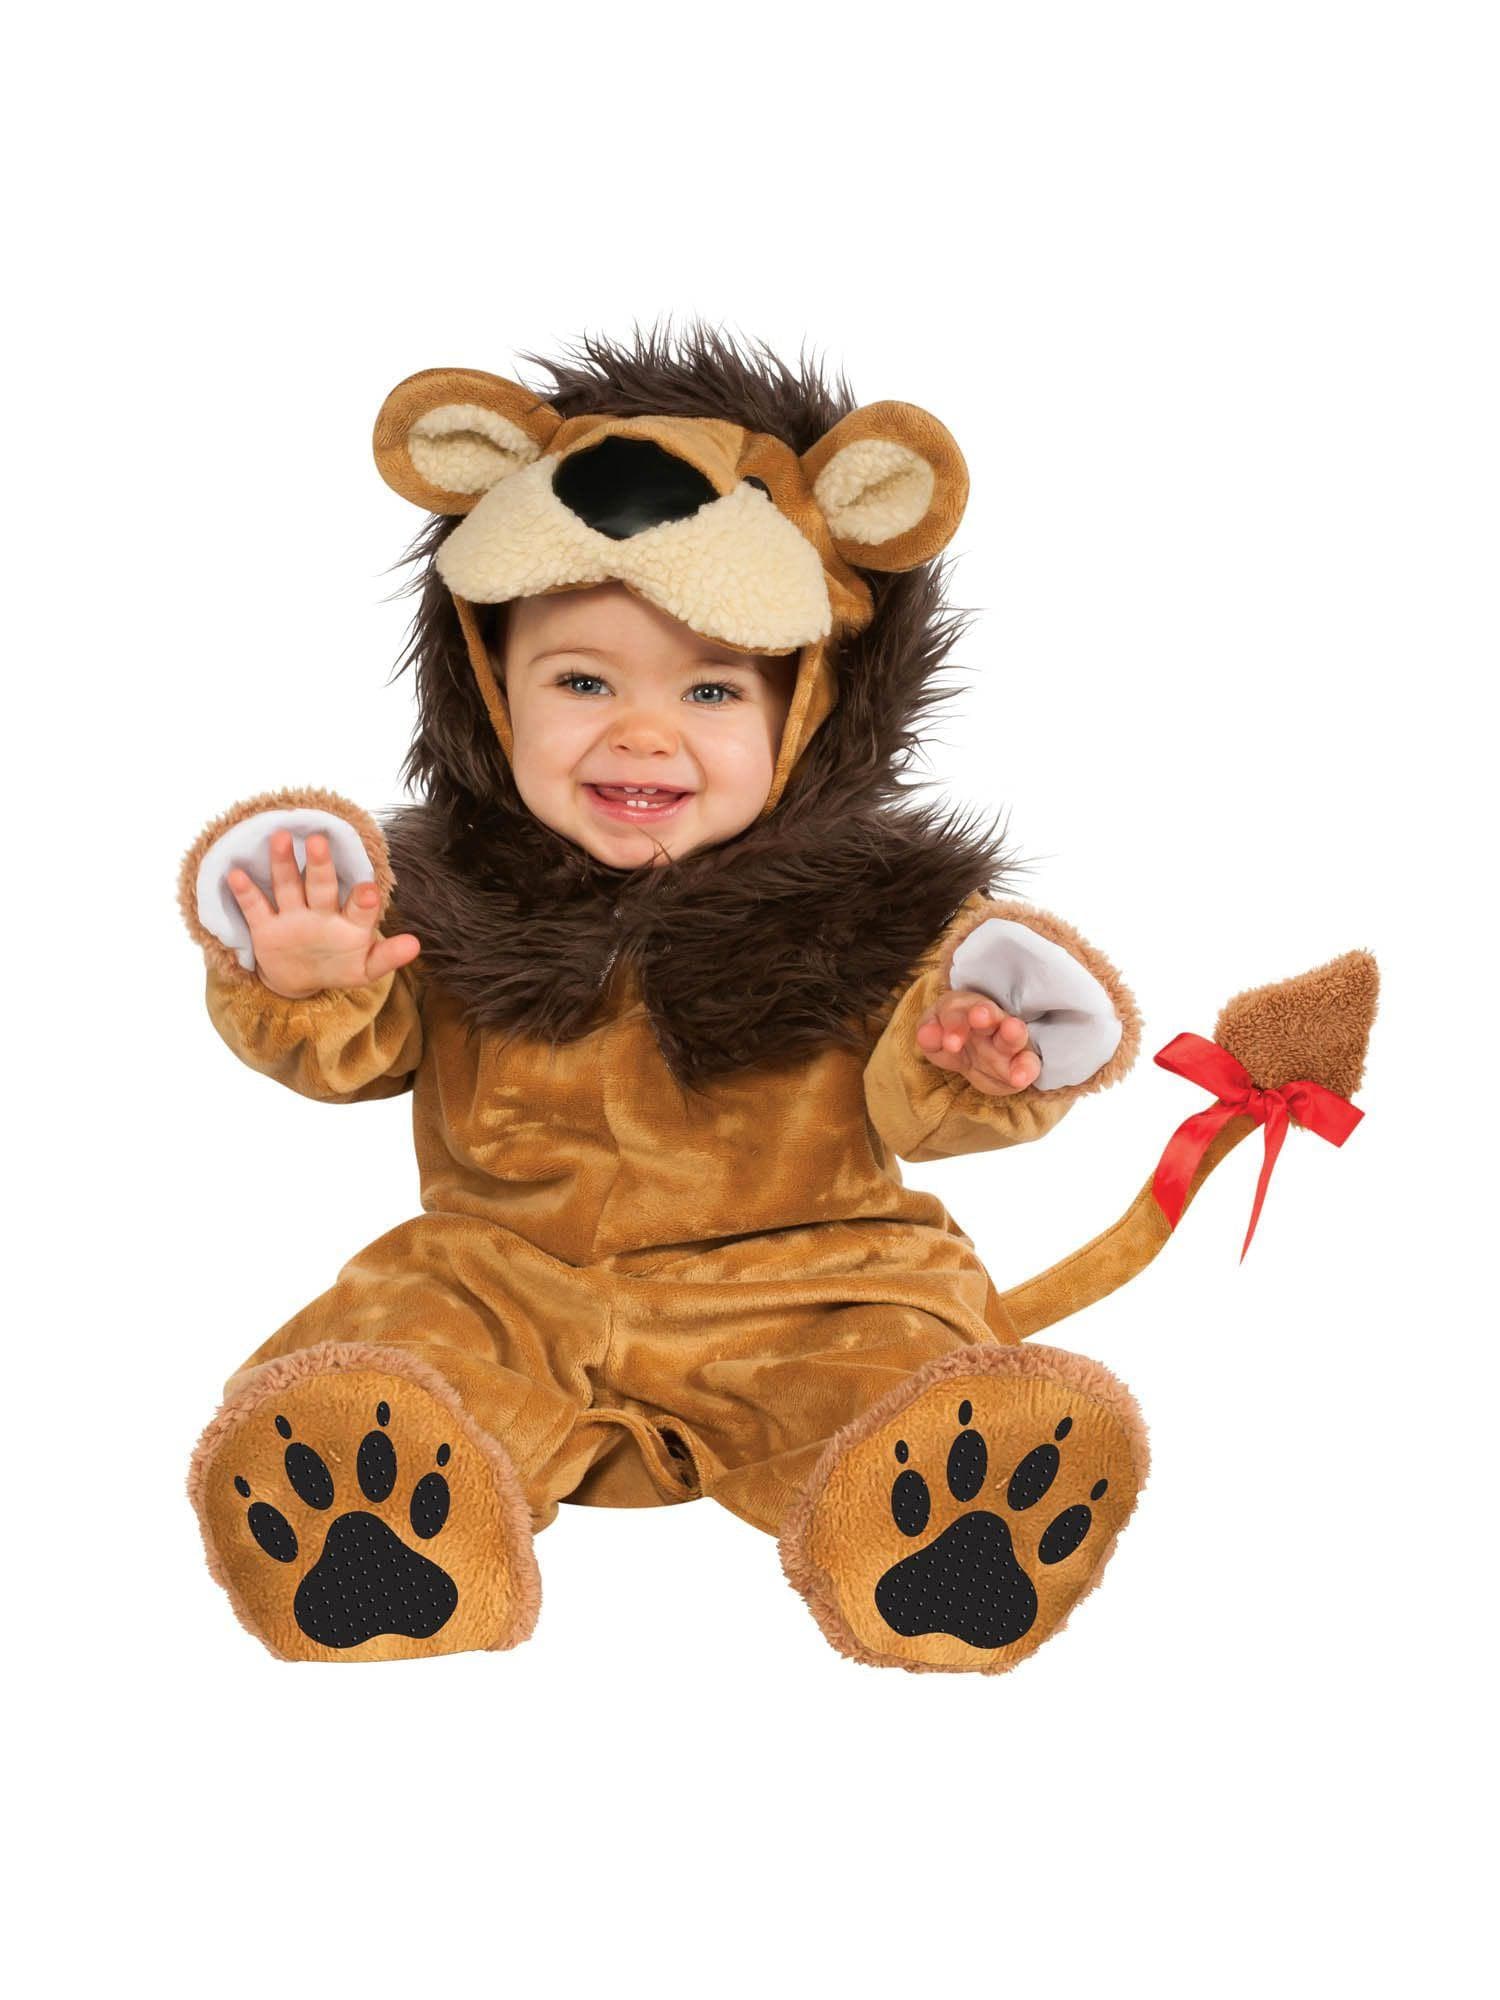 Lil' Lion Costume for Babies - costumes.com